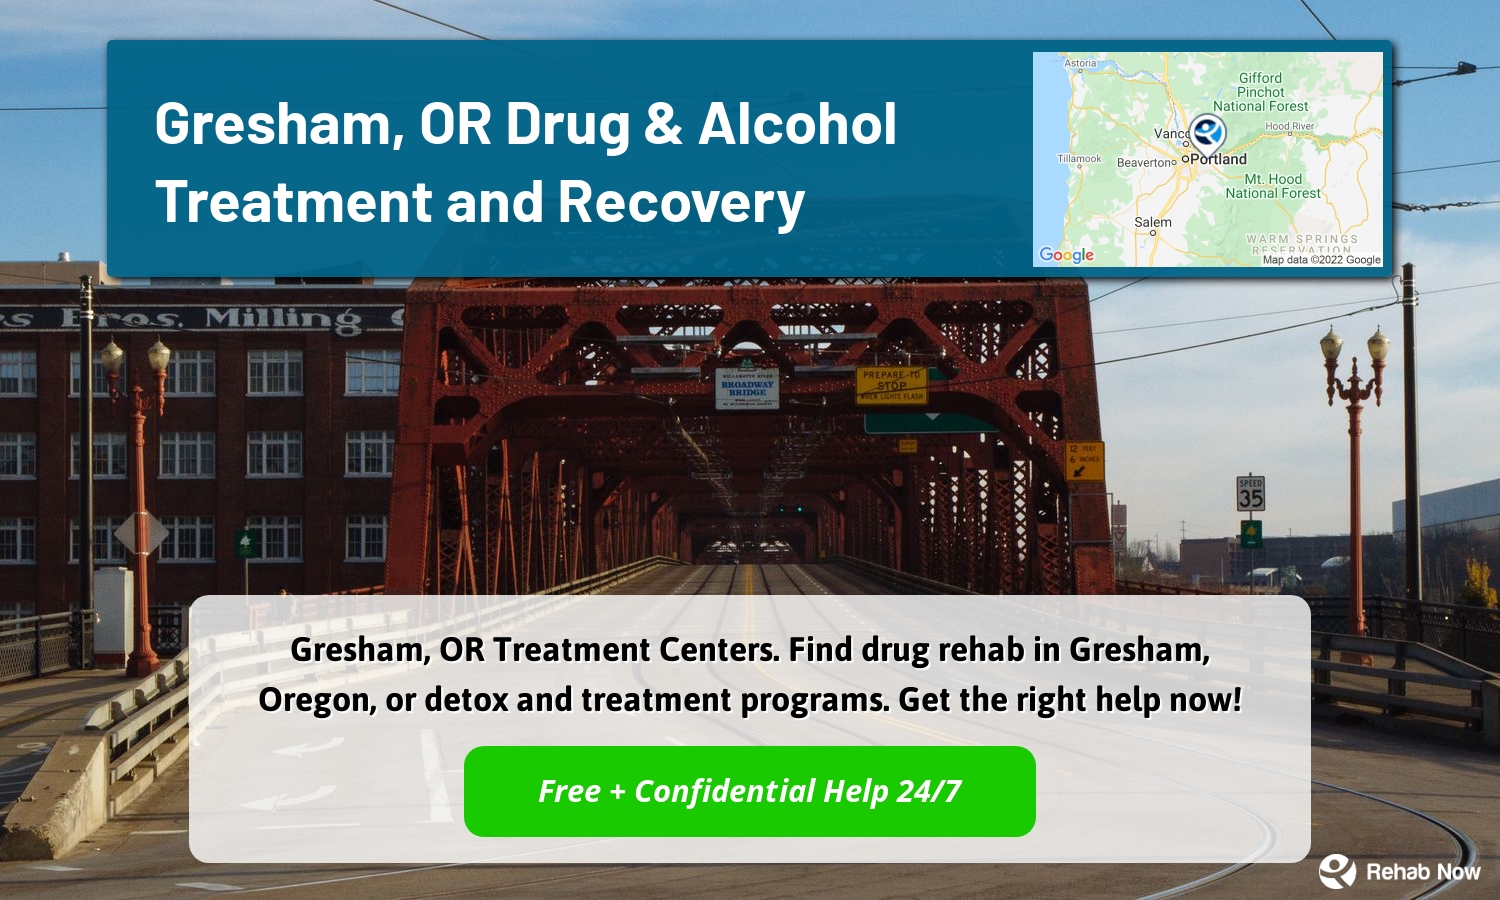 Gresham, OR Treatment Centers. Find drug rehab in Gresham, Oregon, or detox and treatment programs. Get the right help now!